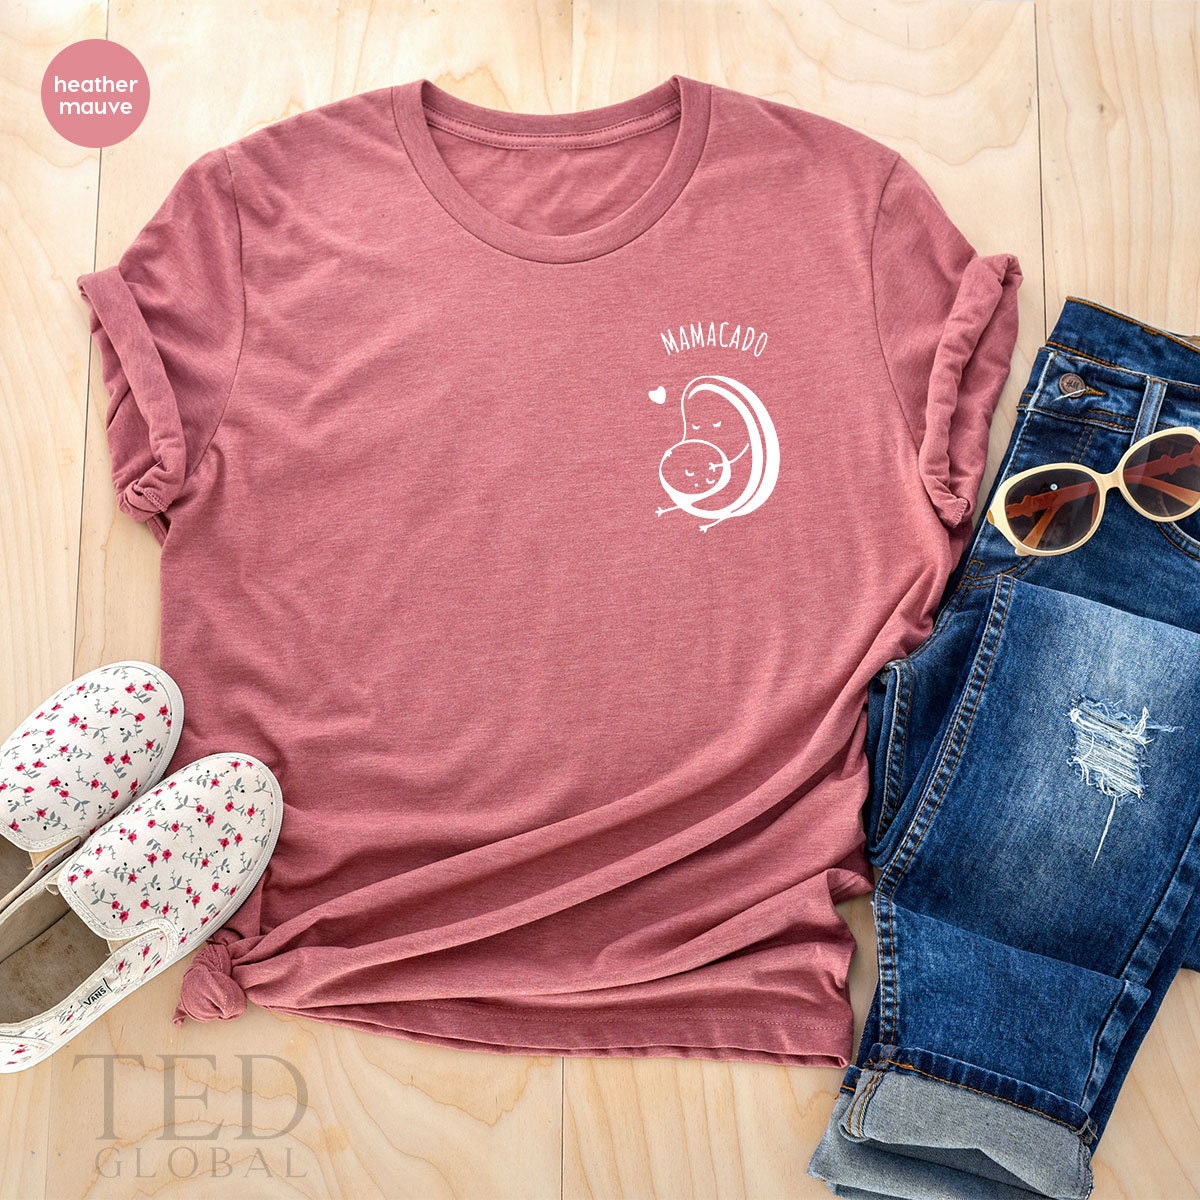 Pregnant Gift, New Mom T Shirt, Pregnancy Announcement Shirt, Maternity TShirt, Mamacado Tee, Expecting Mom Gift, Pregnancy Reveal Husband - Fastdeliverytees.com